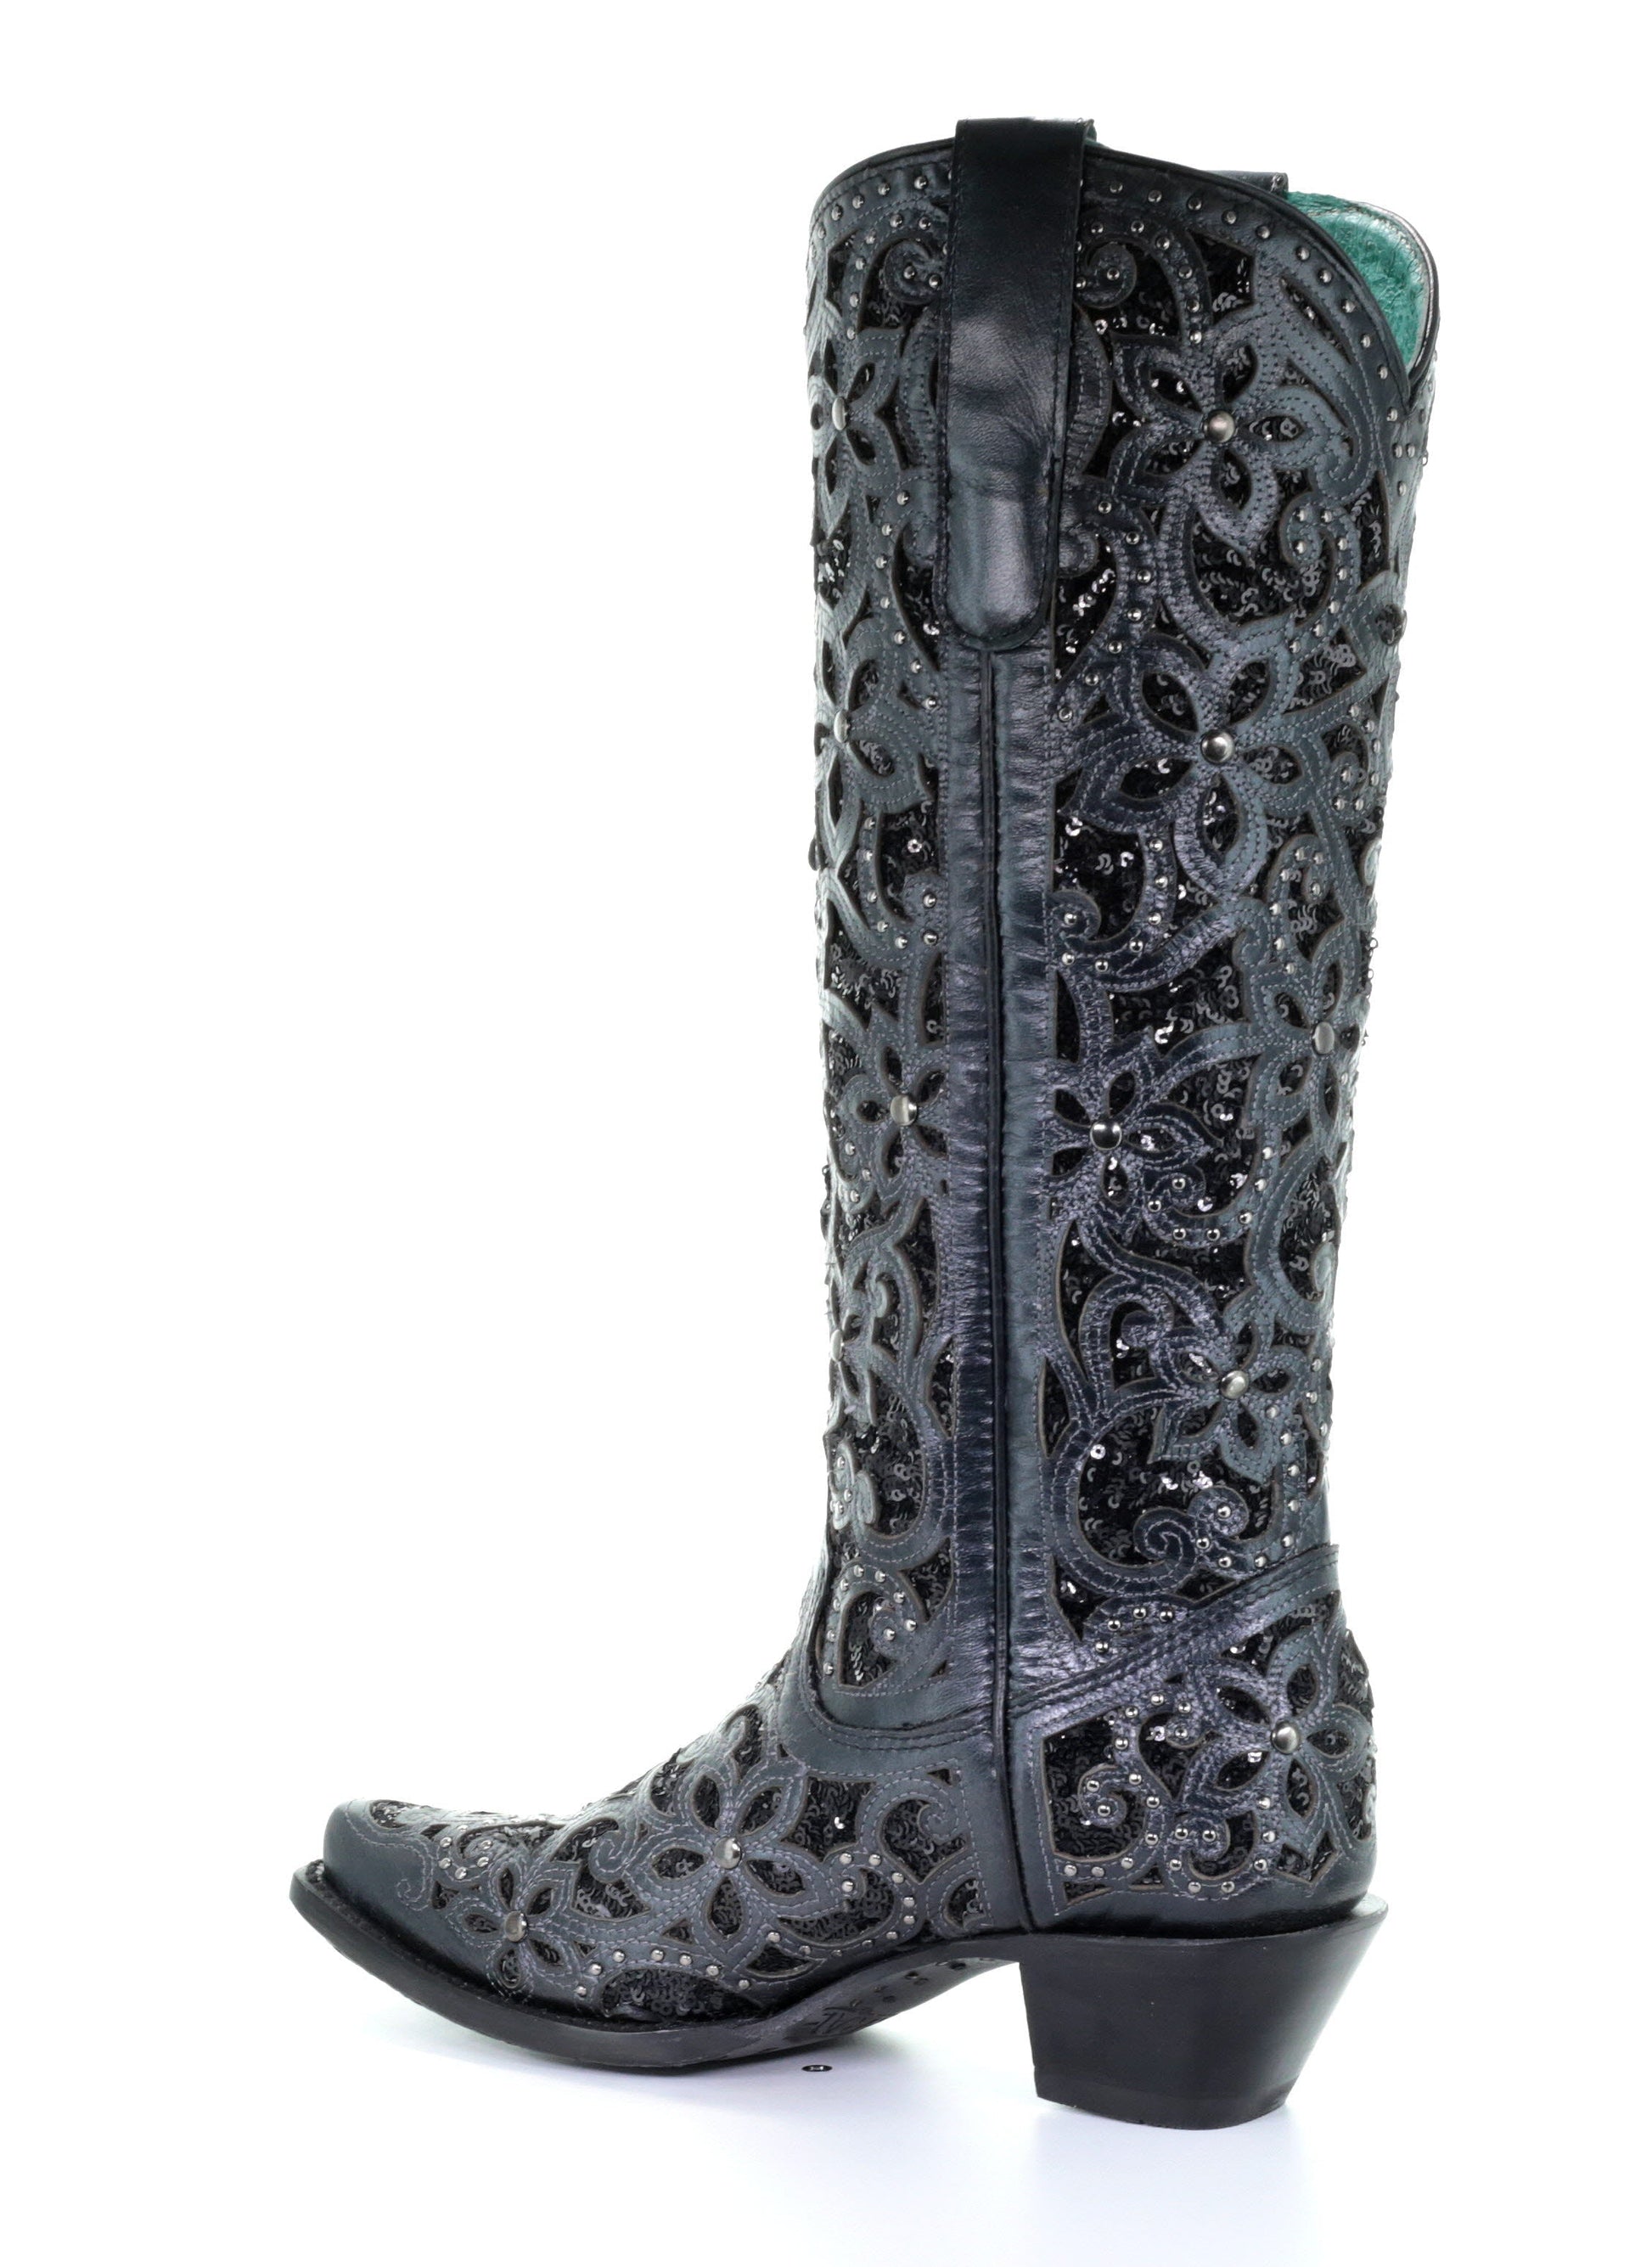 A3589 - Corral black western cowgirl leather sequins knee-high boots for women-Kuet.us